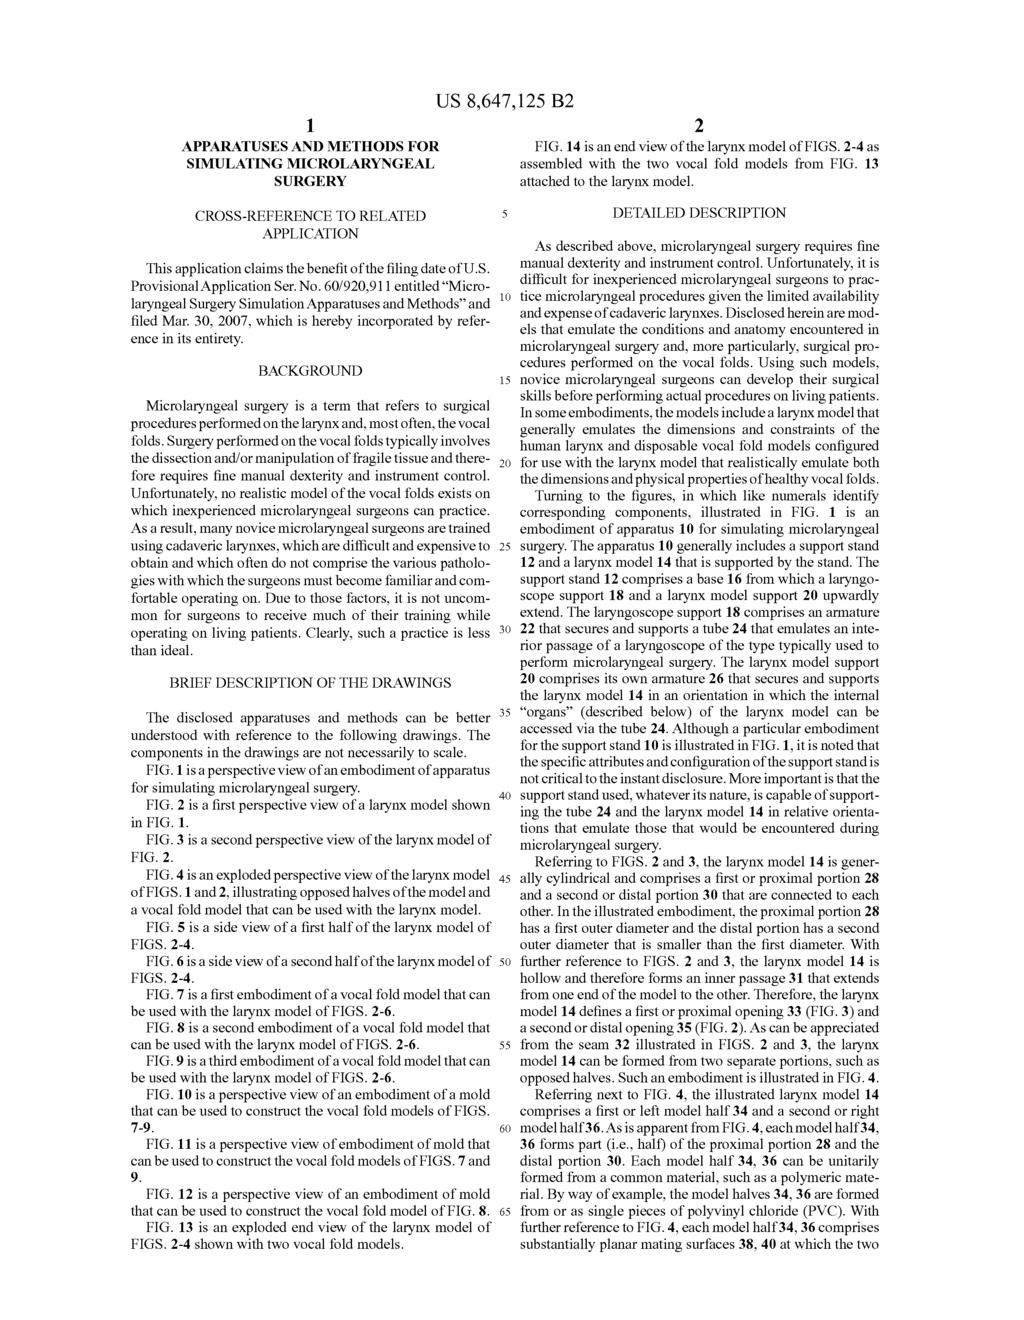 1. APPARATUSES AND METHODS FOR SIMULATING MICROLARYNGEAL SURGERY CROSS-REFERENCE TO RELATED APPLICATION This application claims the benefit of the filing date of U.S. Provisional Application Ser. No.